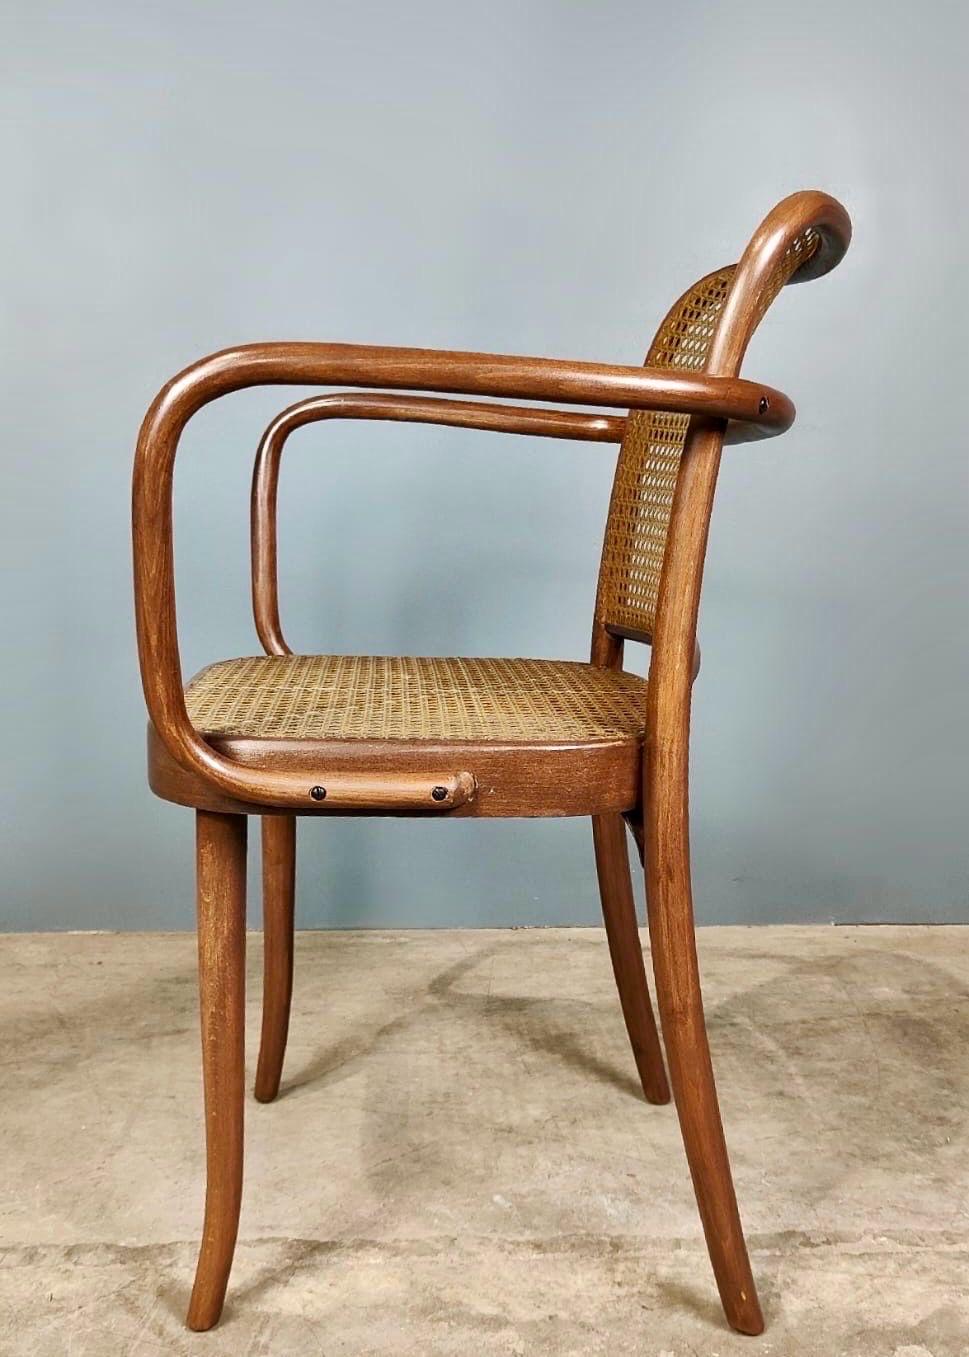 New Stock ✅

4 x Model Prague 811 Walnut Dining Chairs by Josef Frank & Josef Hoffmann for Thonet by Stendig

This set of four vintage mid century Bentwood Prague Model 811 cafe dining chair were originally designed by Austrian architects Josef